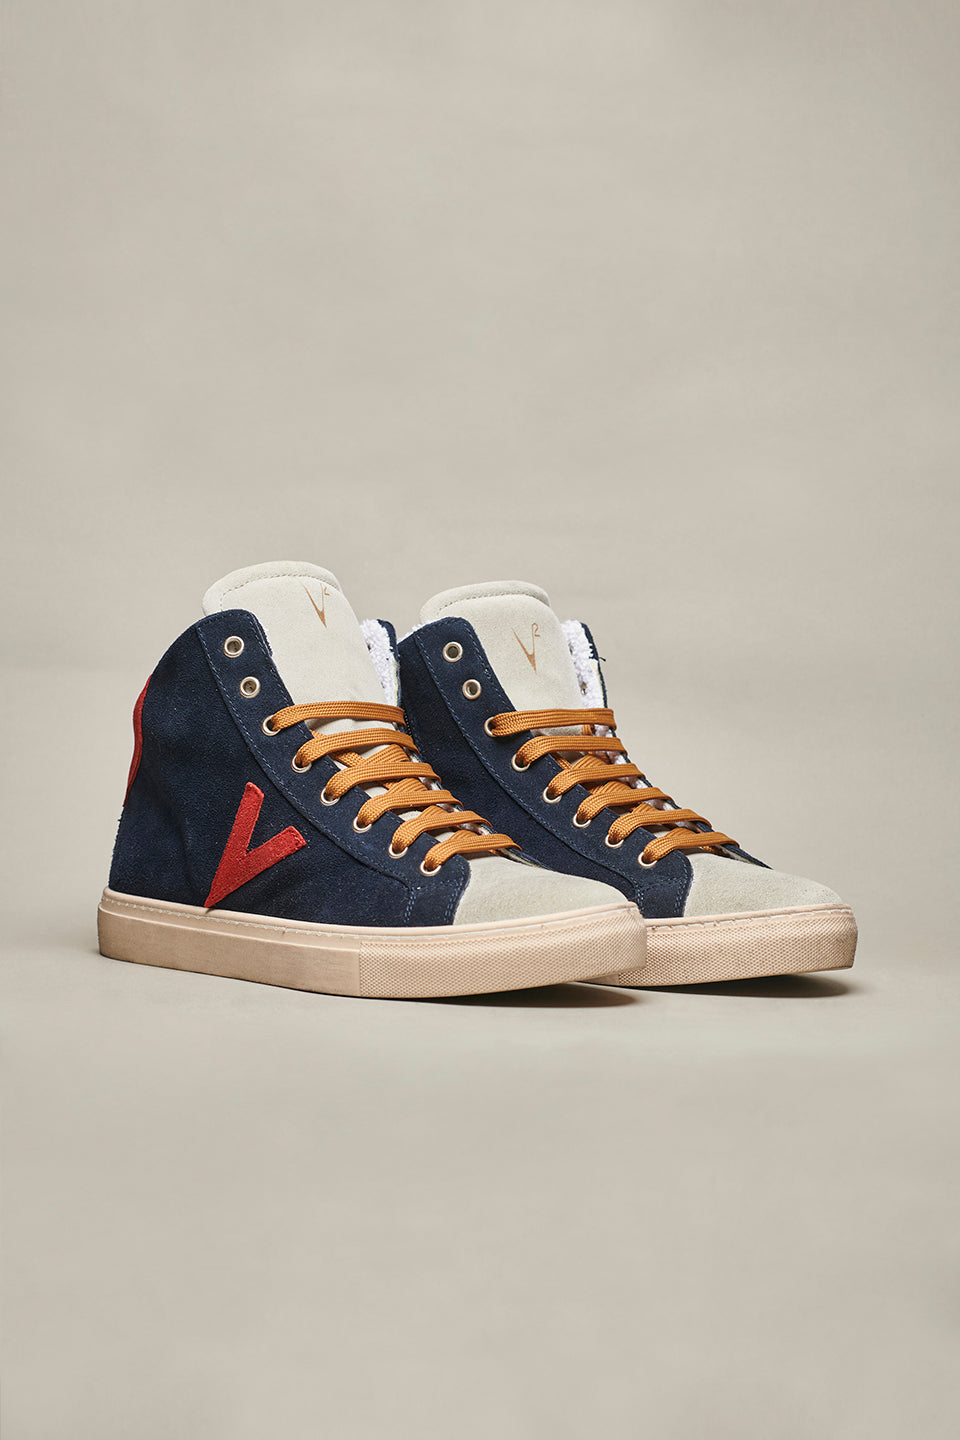 OLYMPIC MID- Blue high sneakers with red back and insert